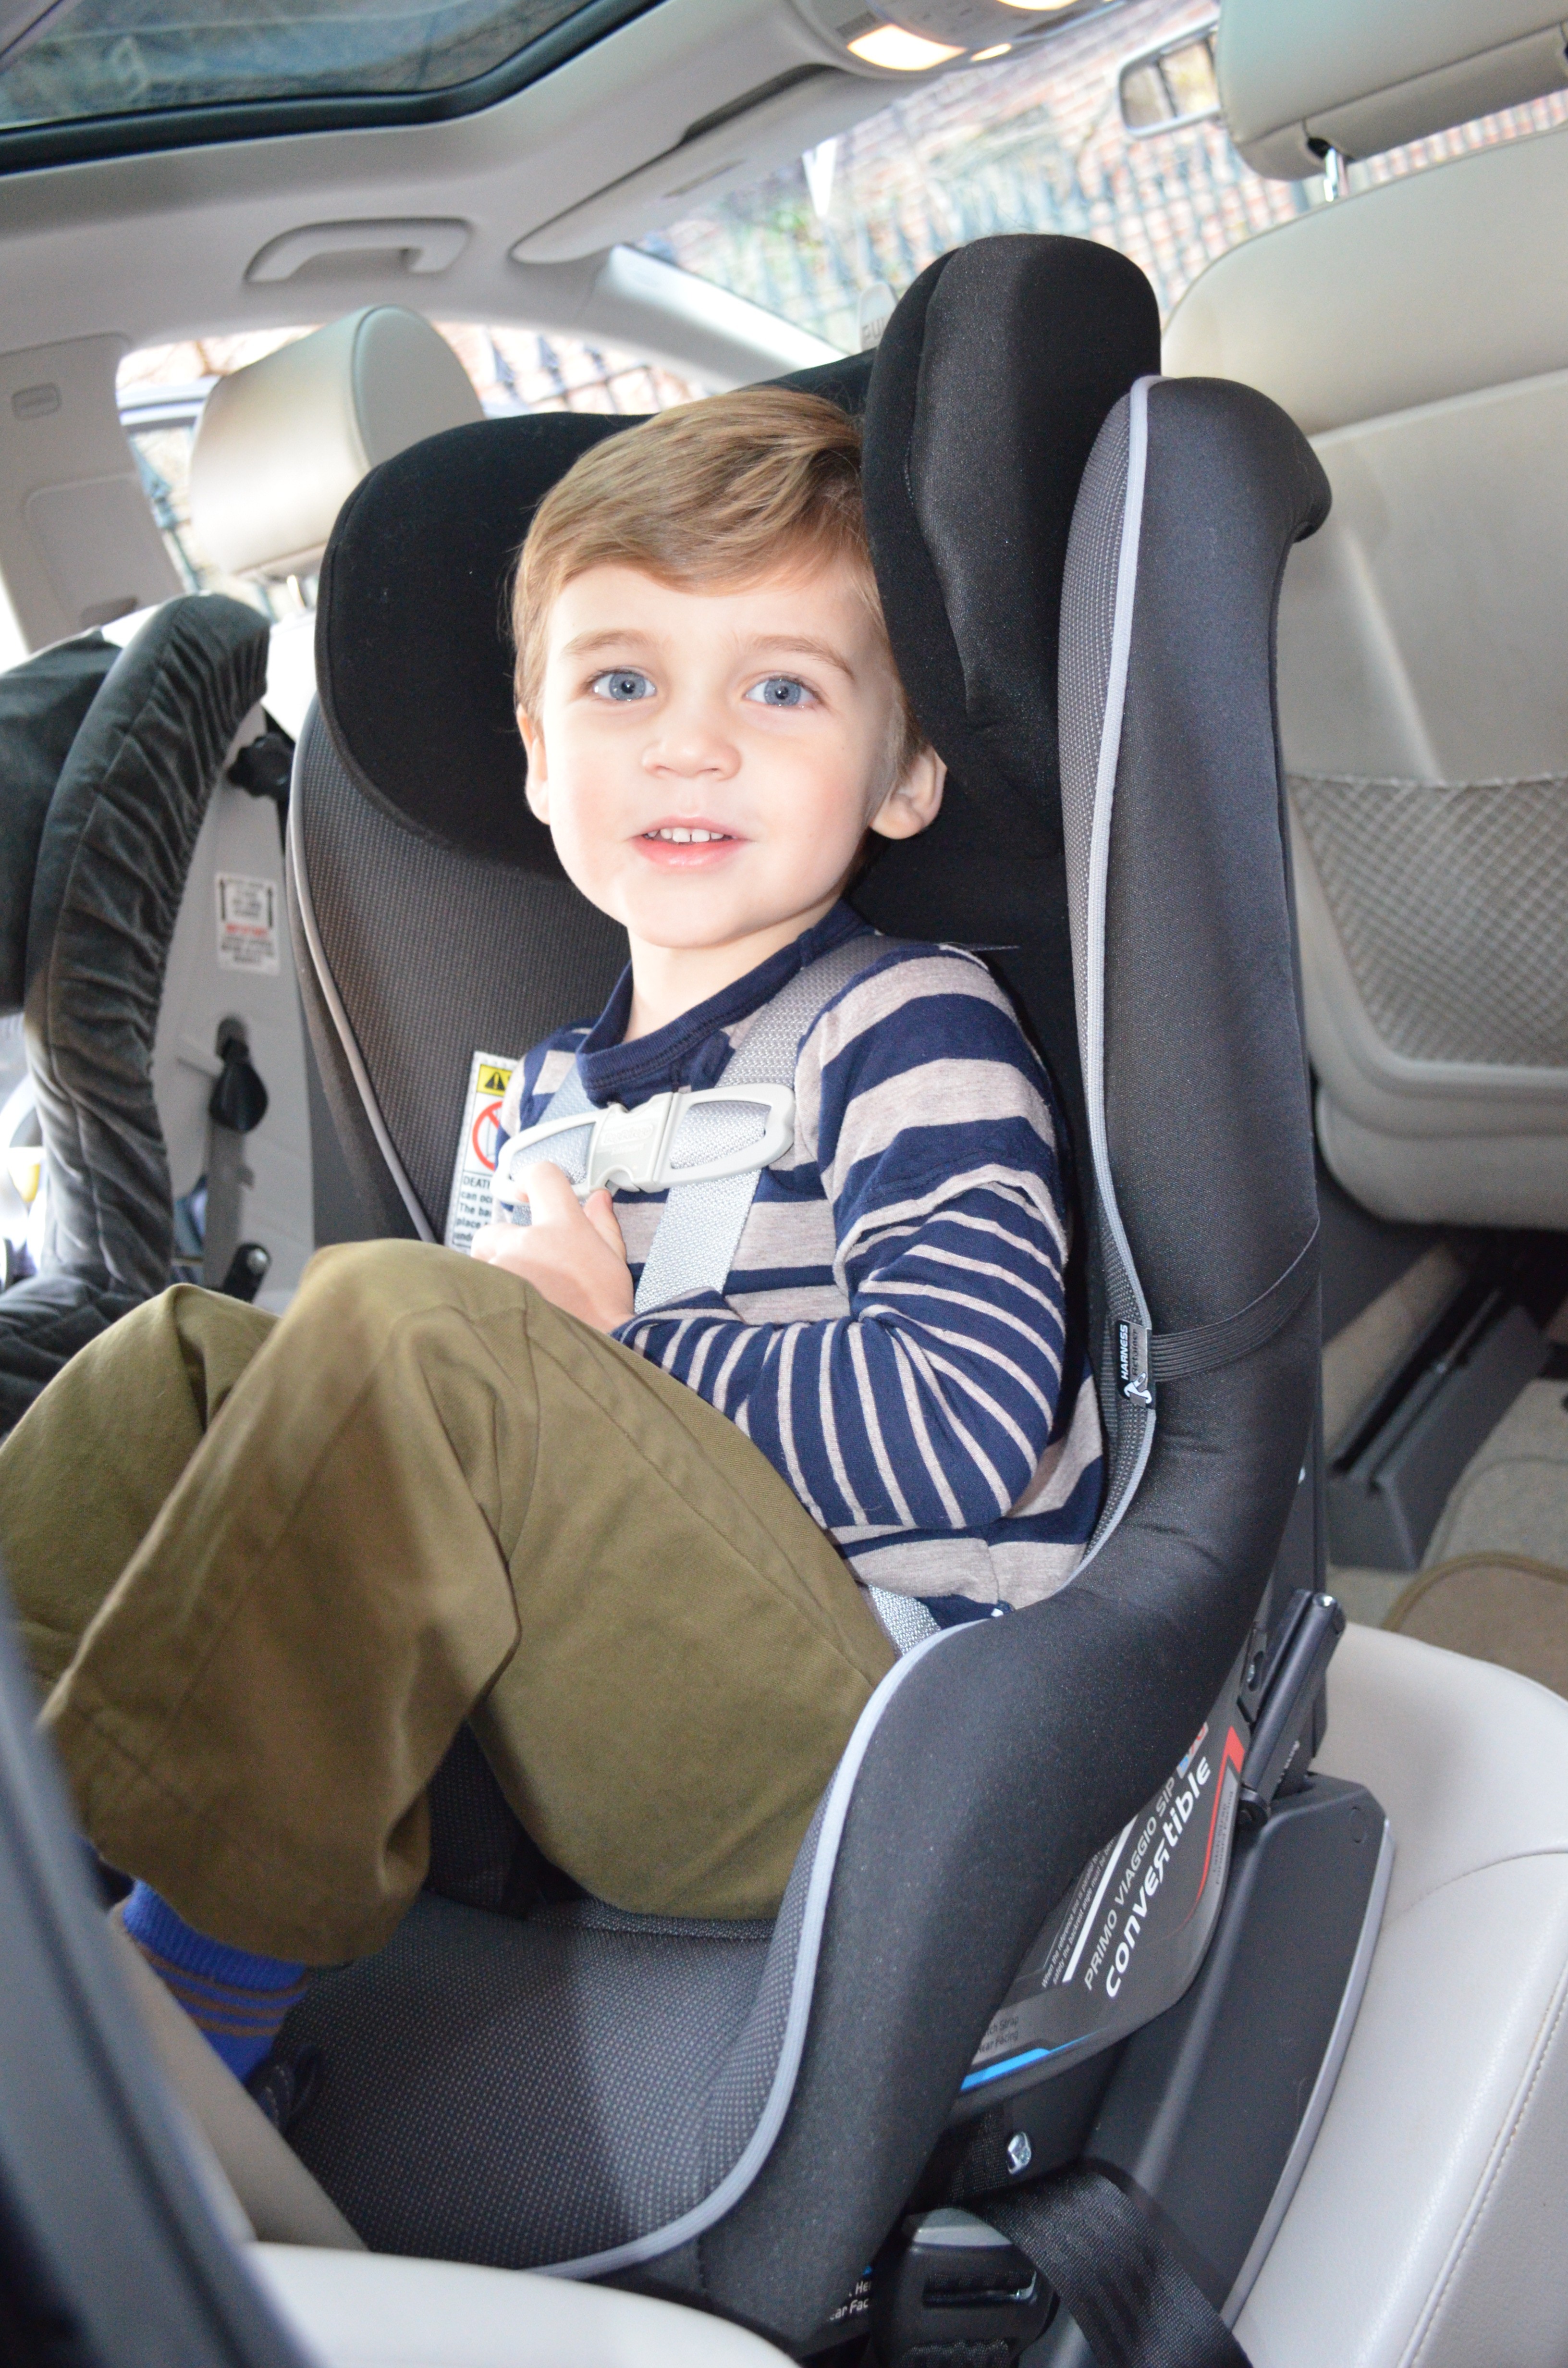 Child Turn Forward Facing, Is It Illegal To Have A Car Seat Facing Forward